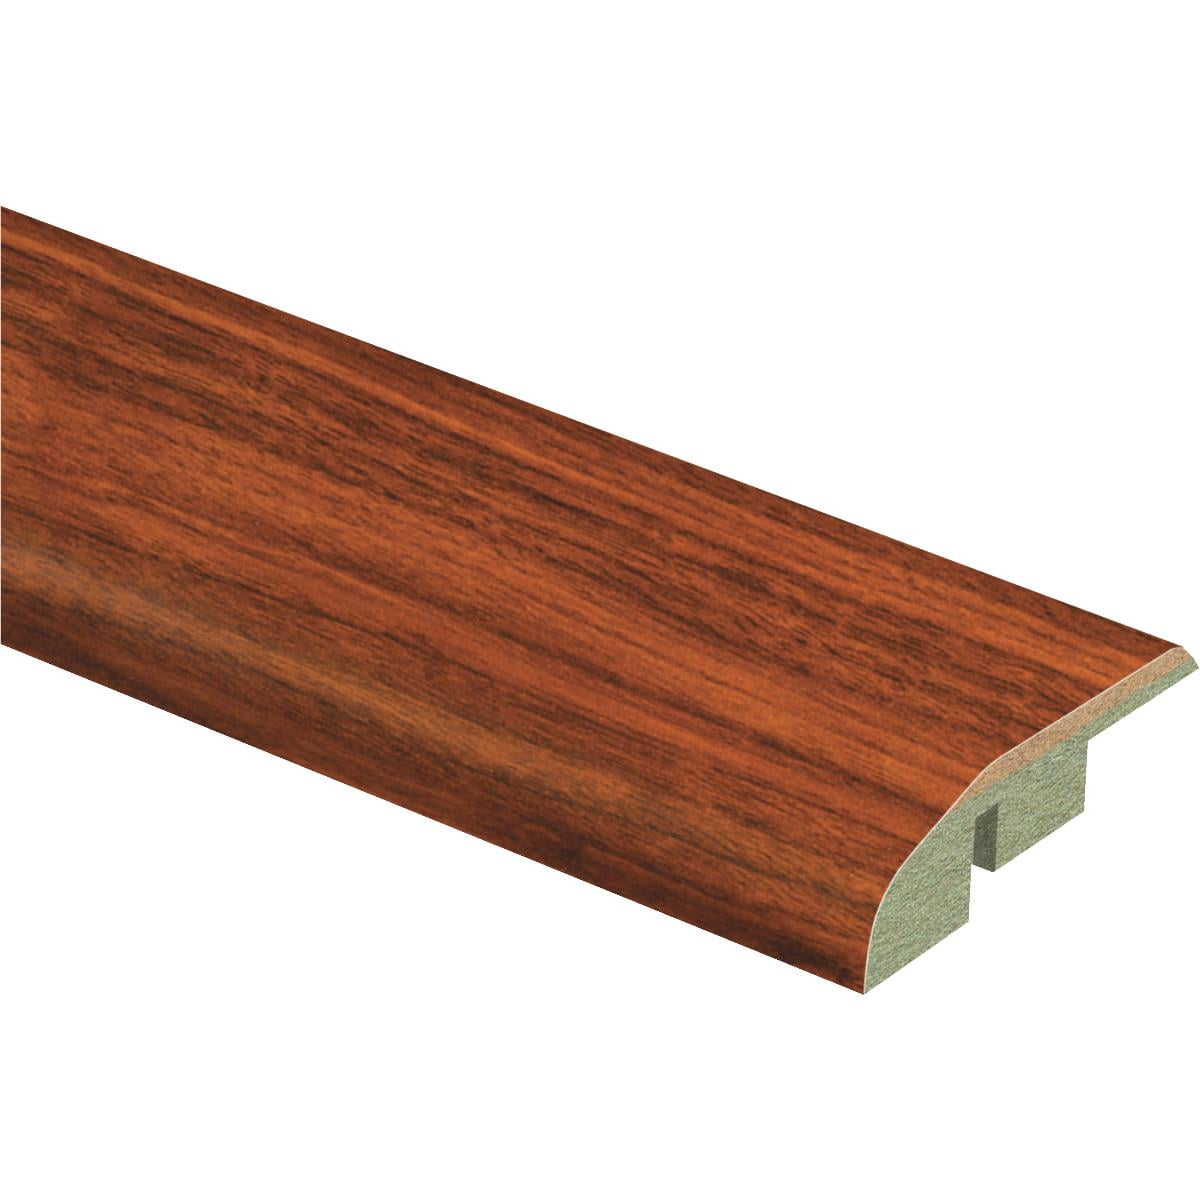 Mame 20ft of 3/4" Cherry Woodgrain T-Molding for Arcade Games or Cabinets 